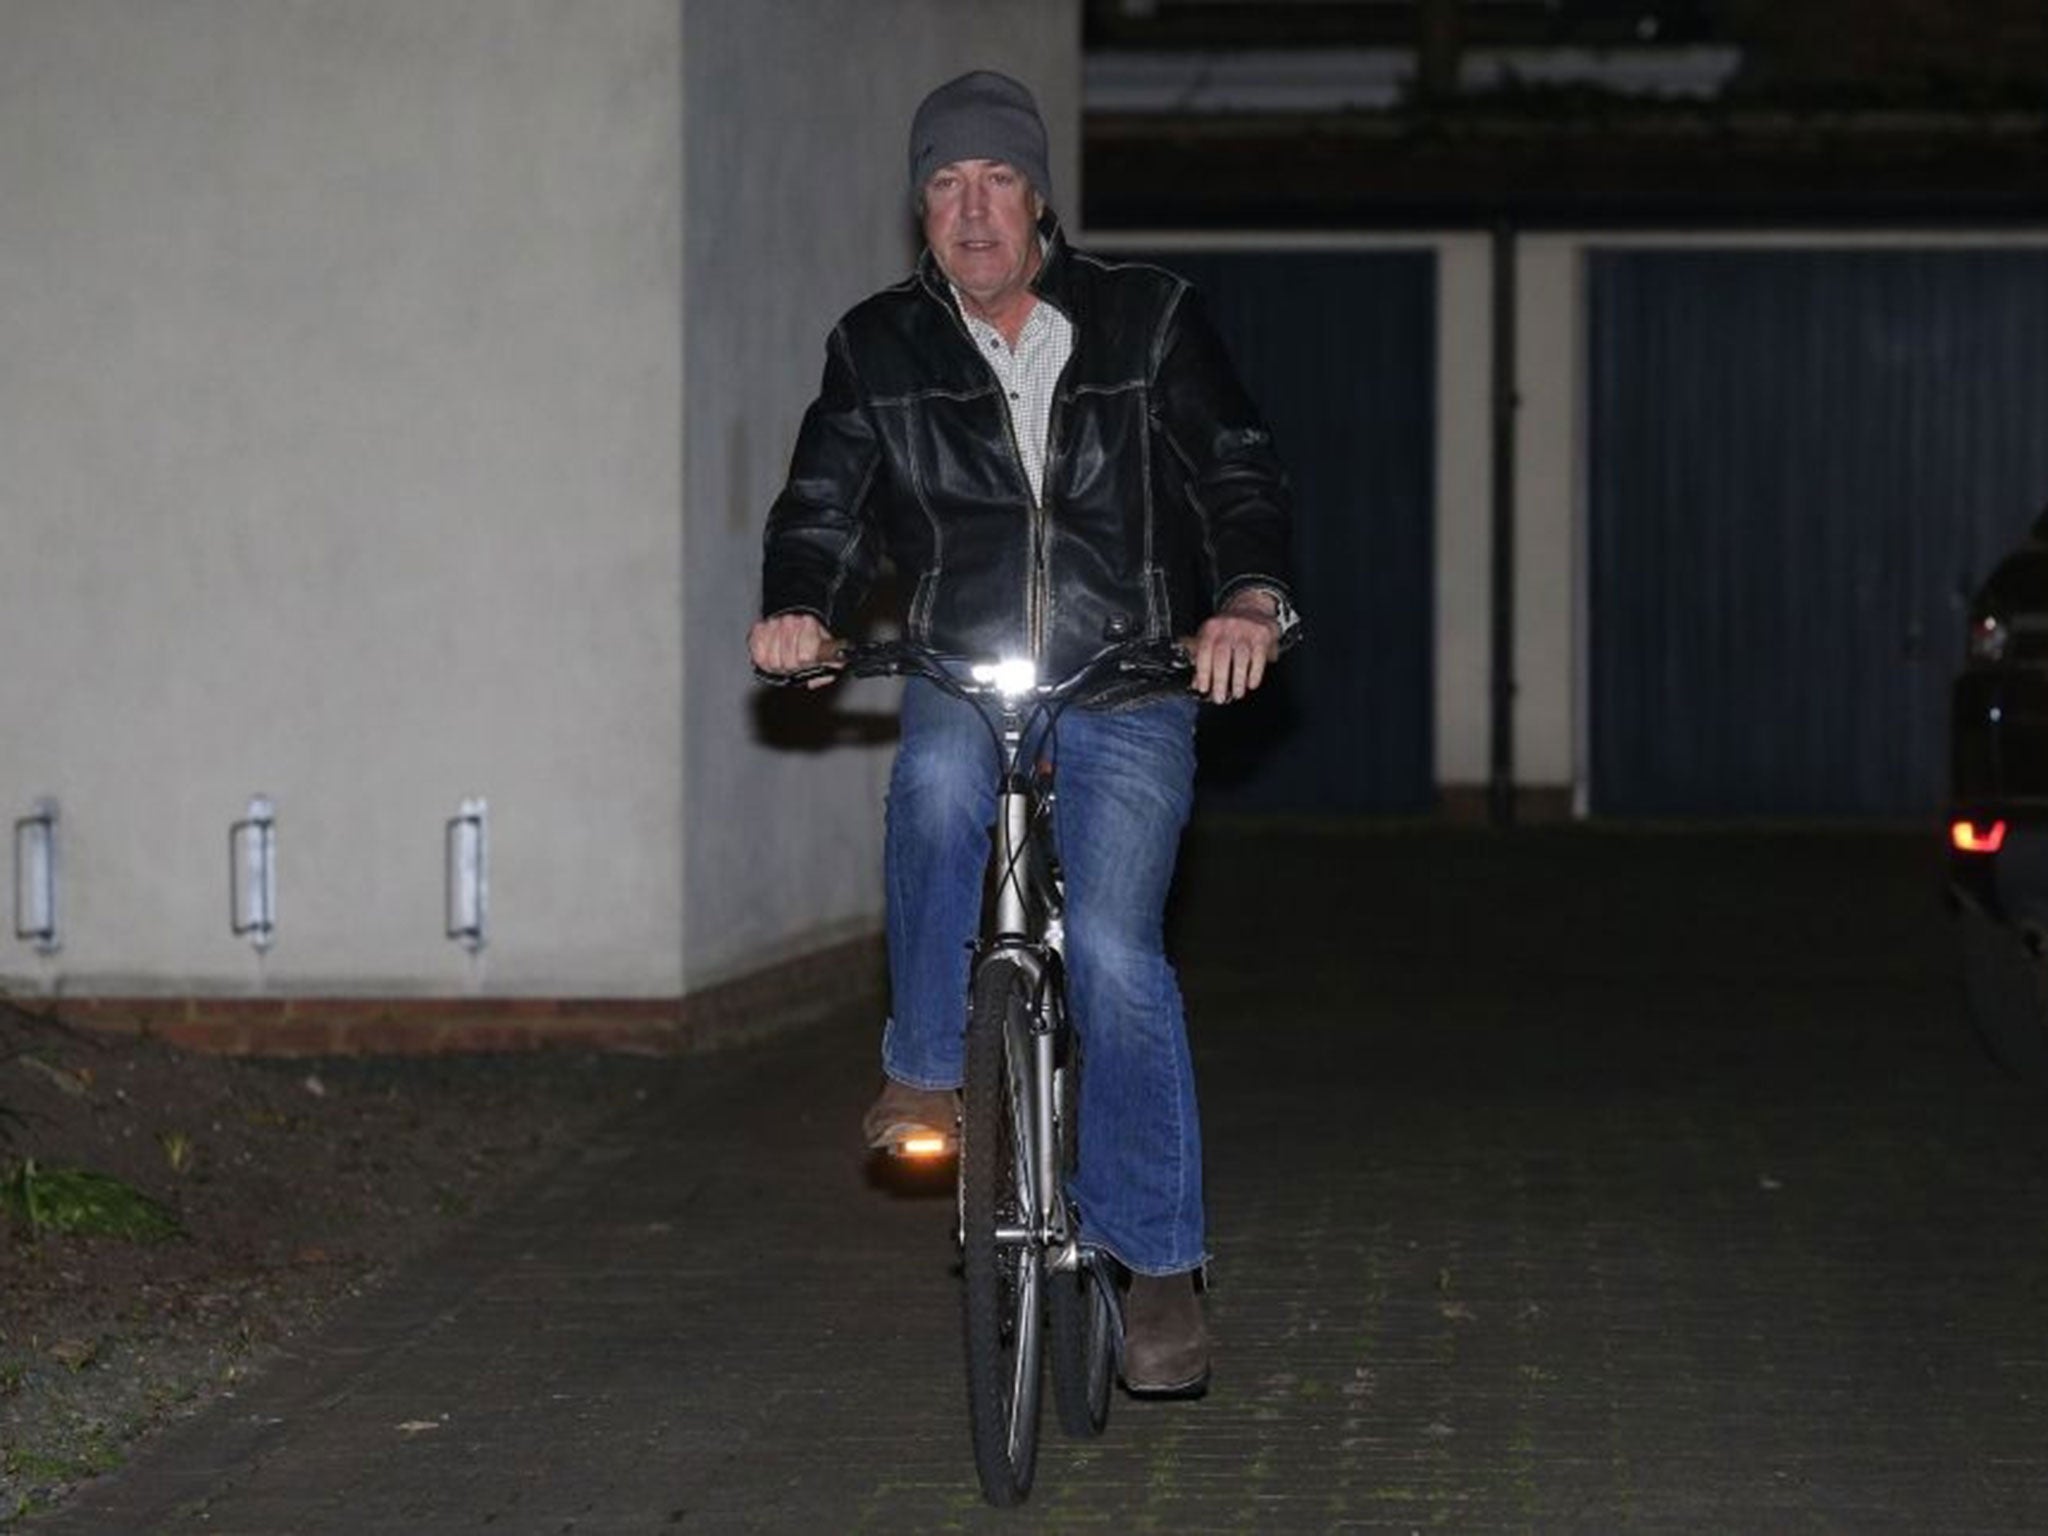 Jeremy Clarkson leaves his home in west London, on a bicycle, as Clarkson's BBC career is over after an internal investigation found he launched an "unprovoked physical and verbal attack" which left one of the colleagues in hospital. PRESS ASSOCIATION Pho